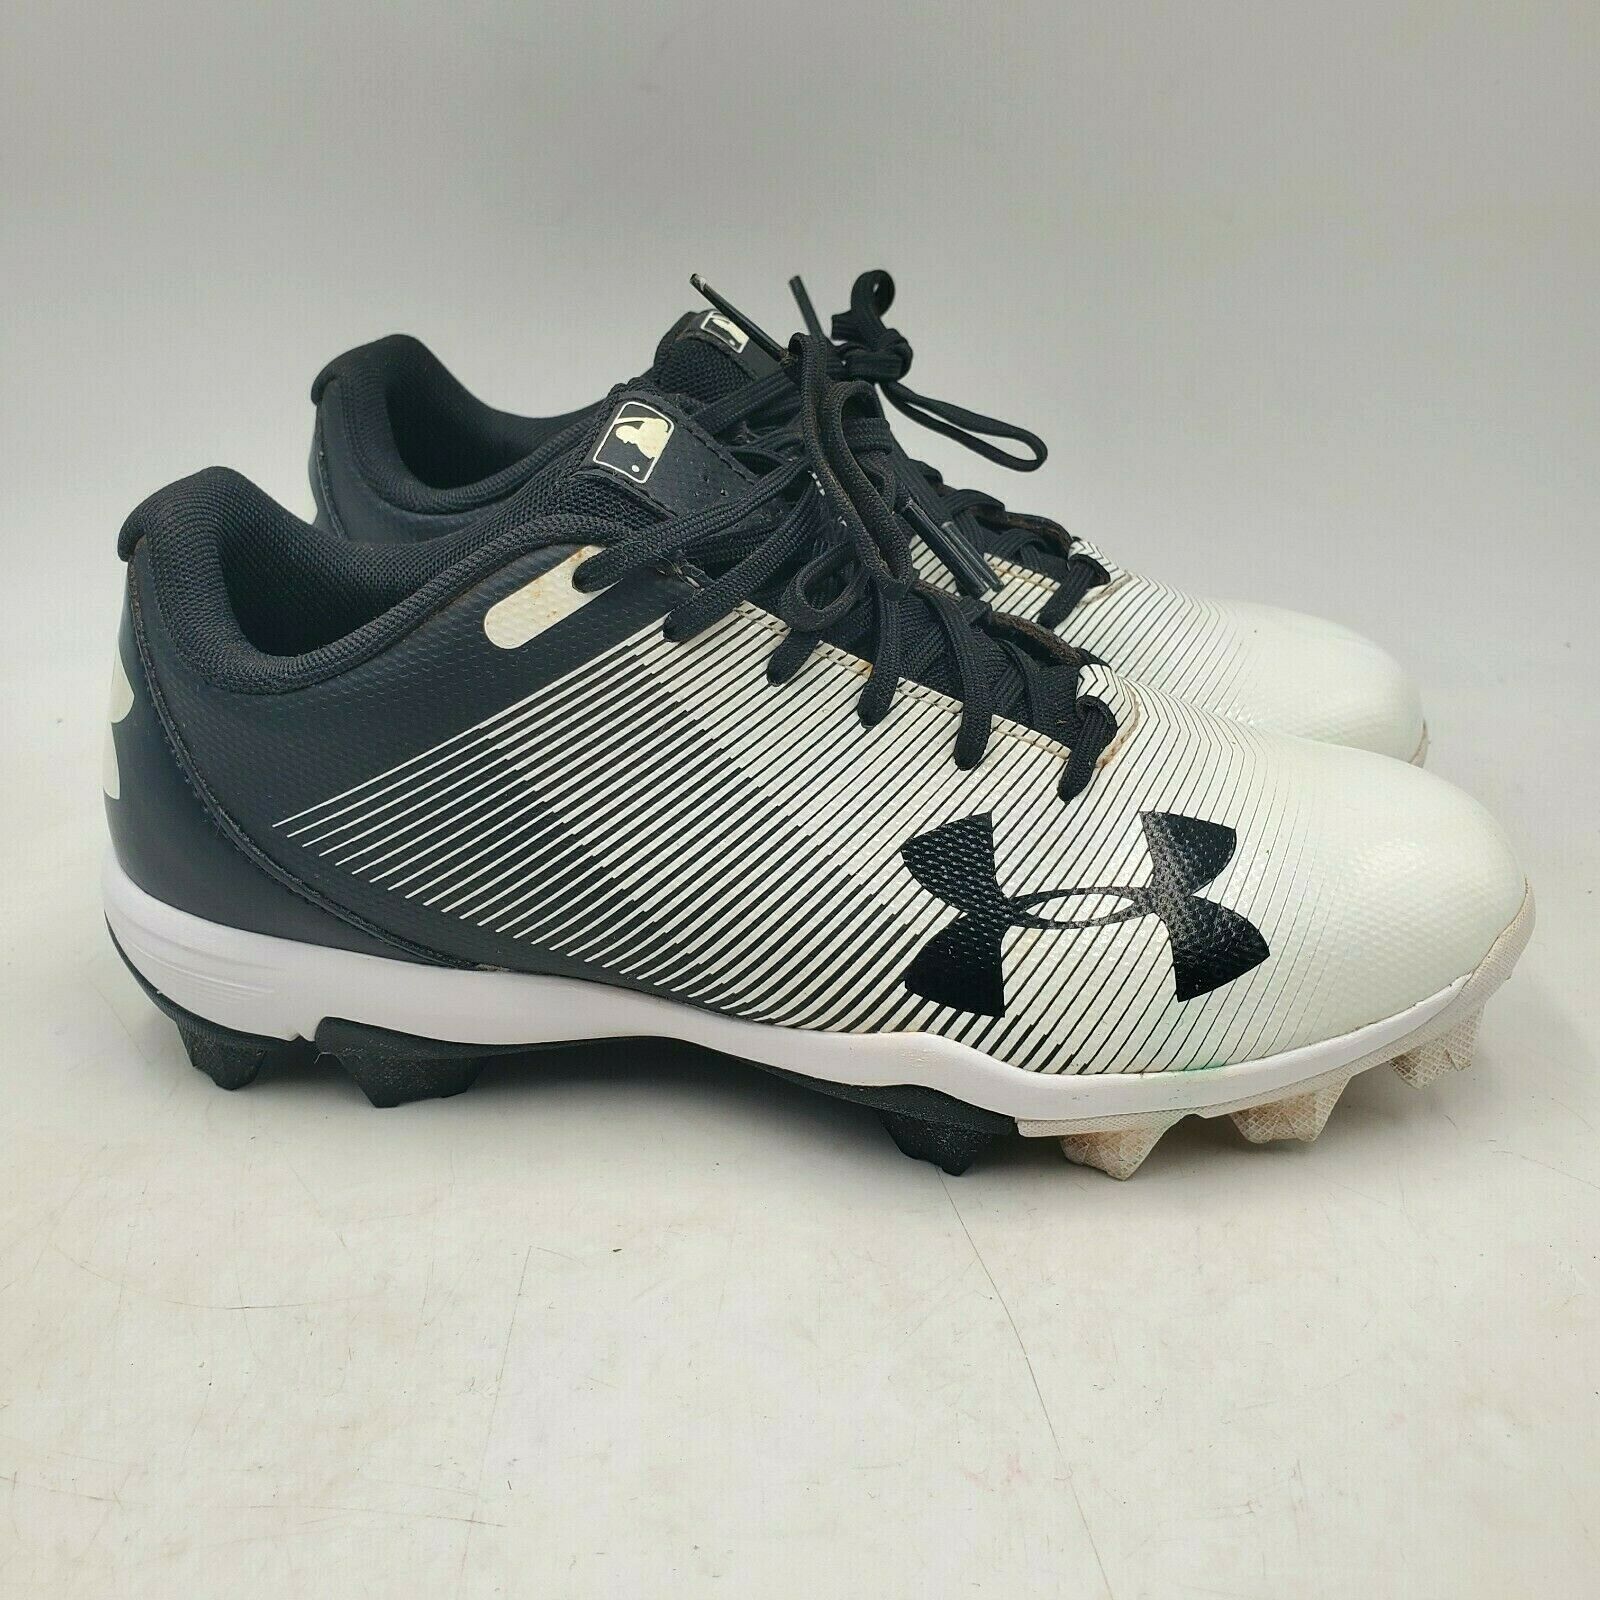 Under Armour Bryce Harper Mid Youth Baseball Cleats Shoes size 4.5Y